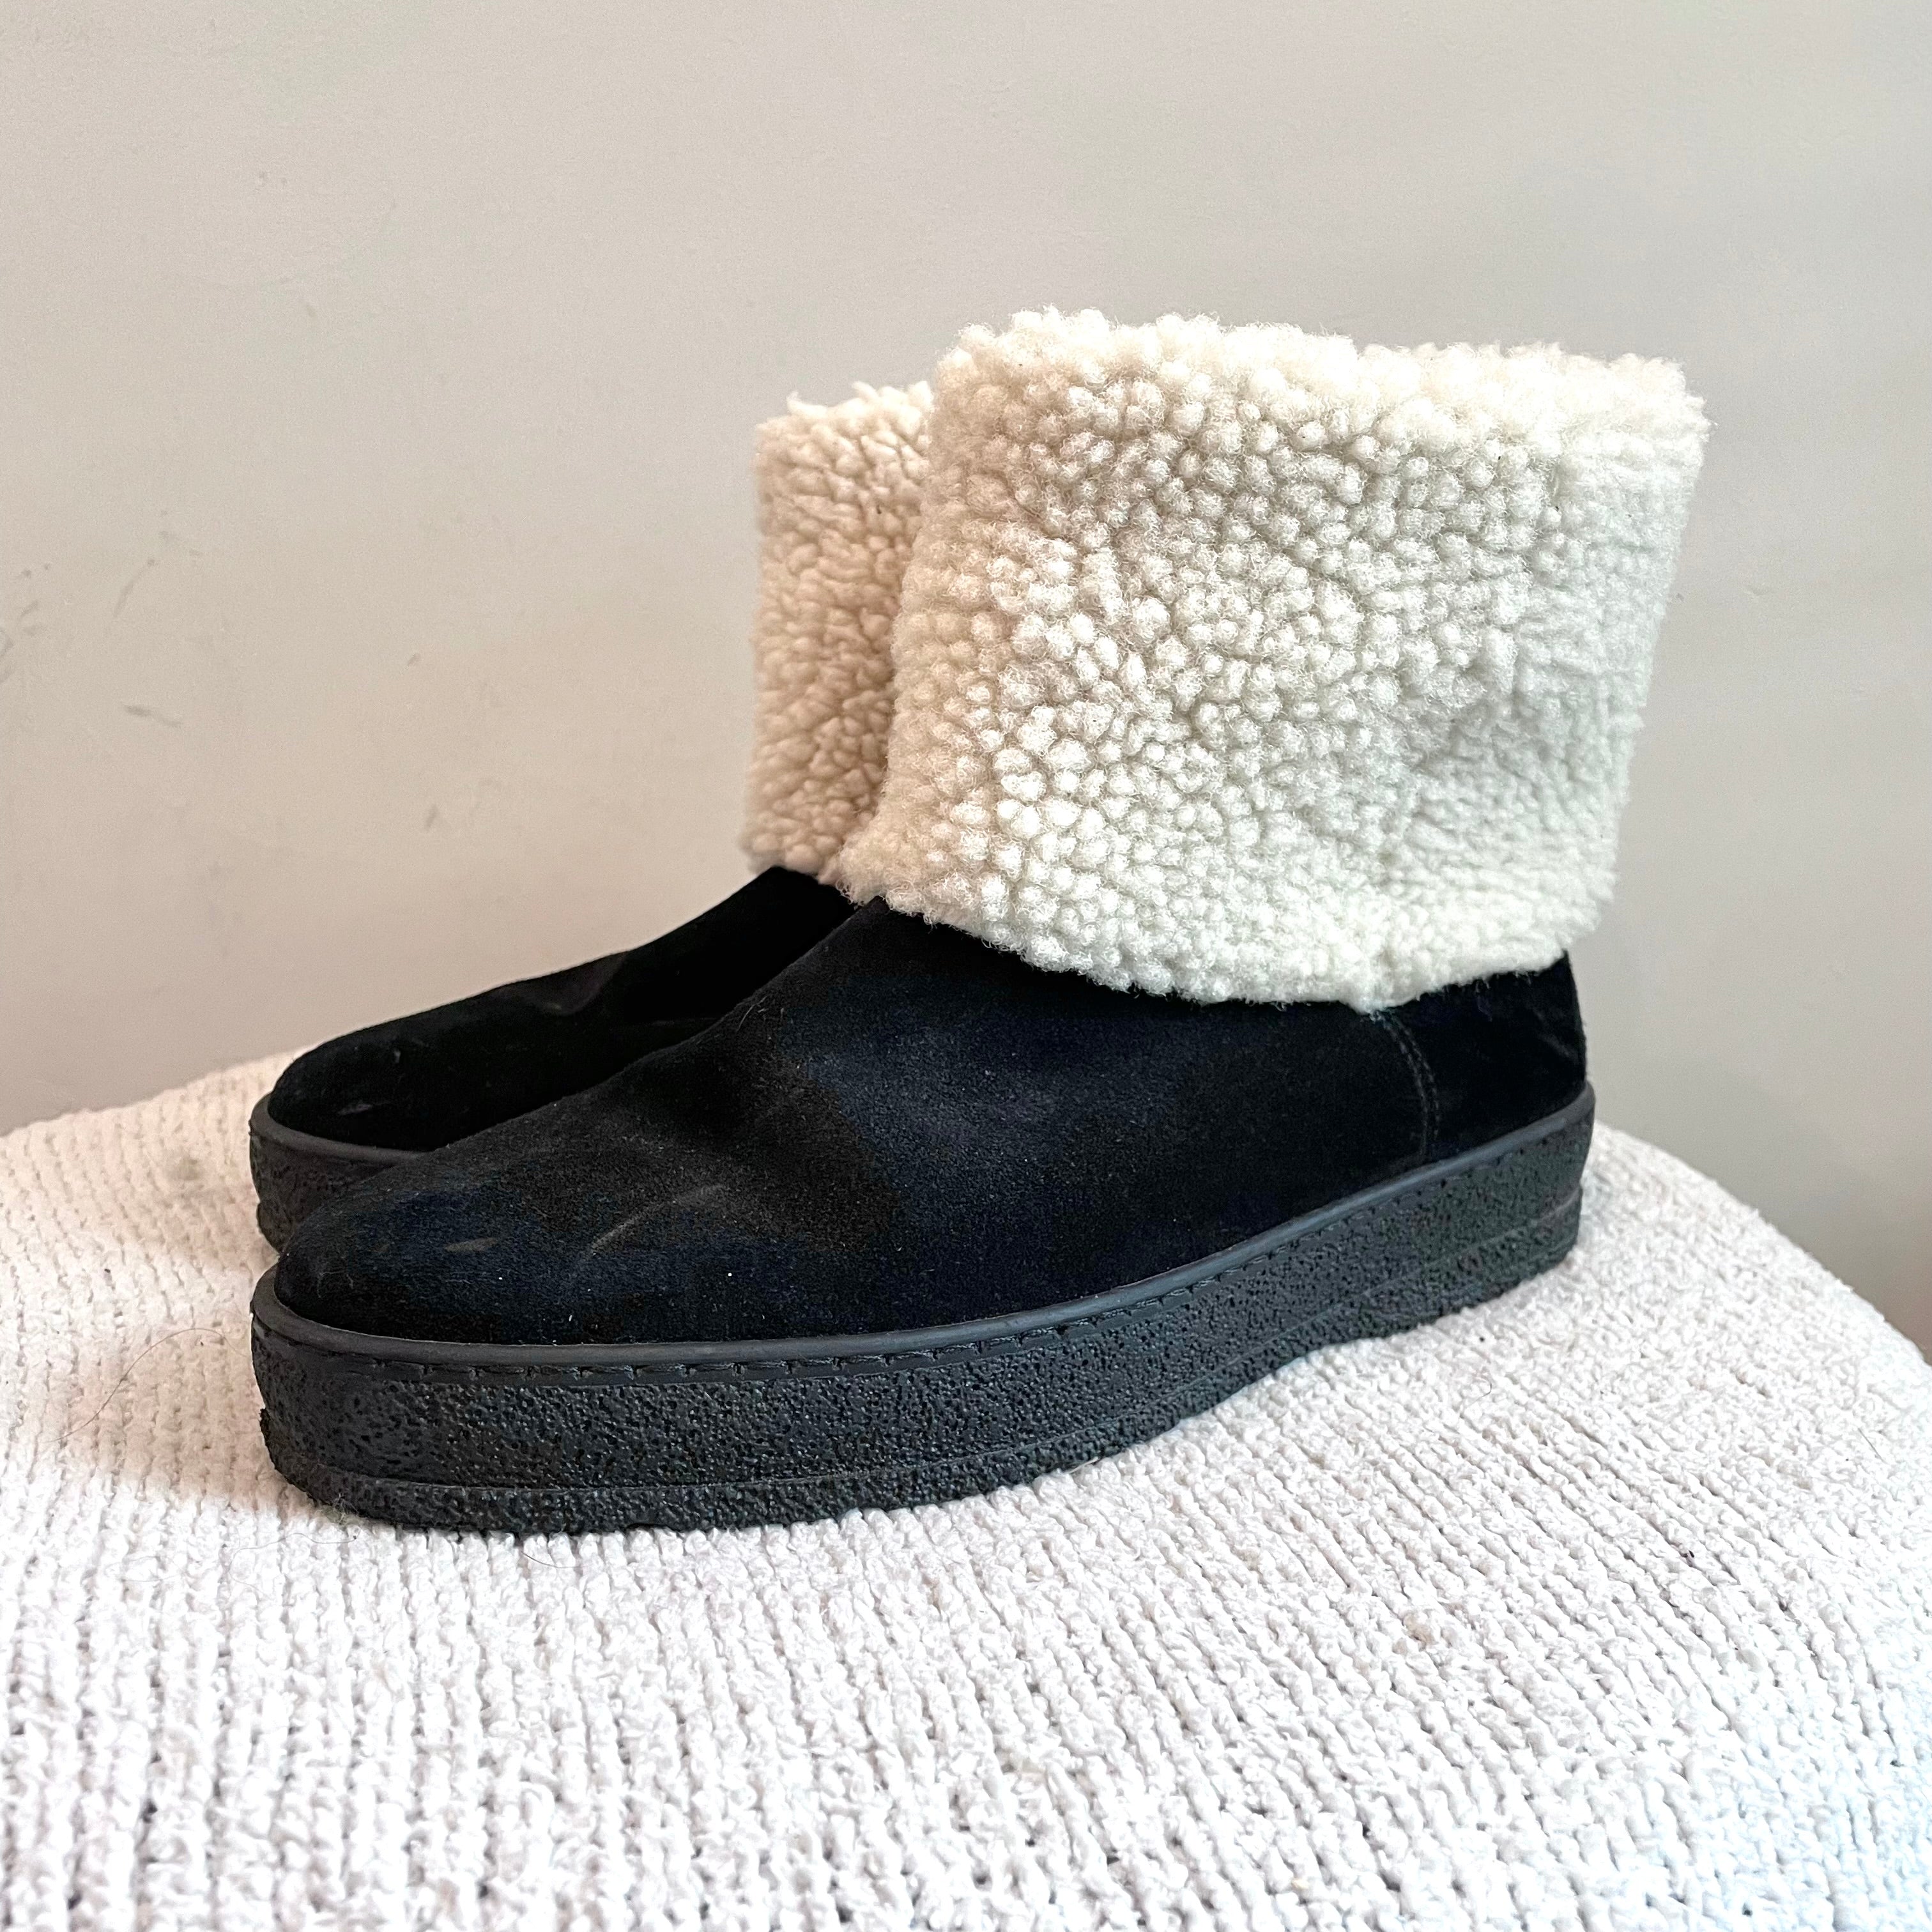 Suede Shearling Lined Boots